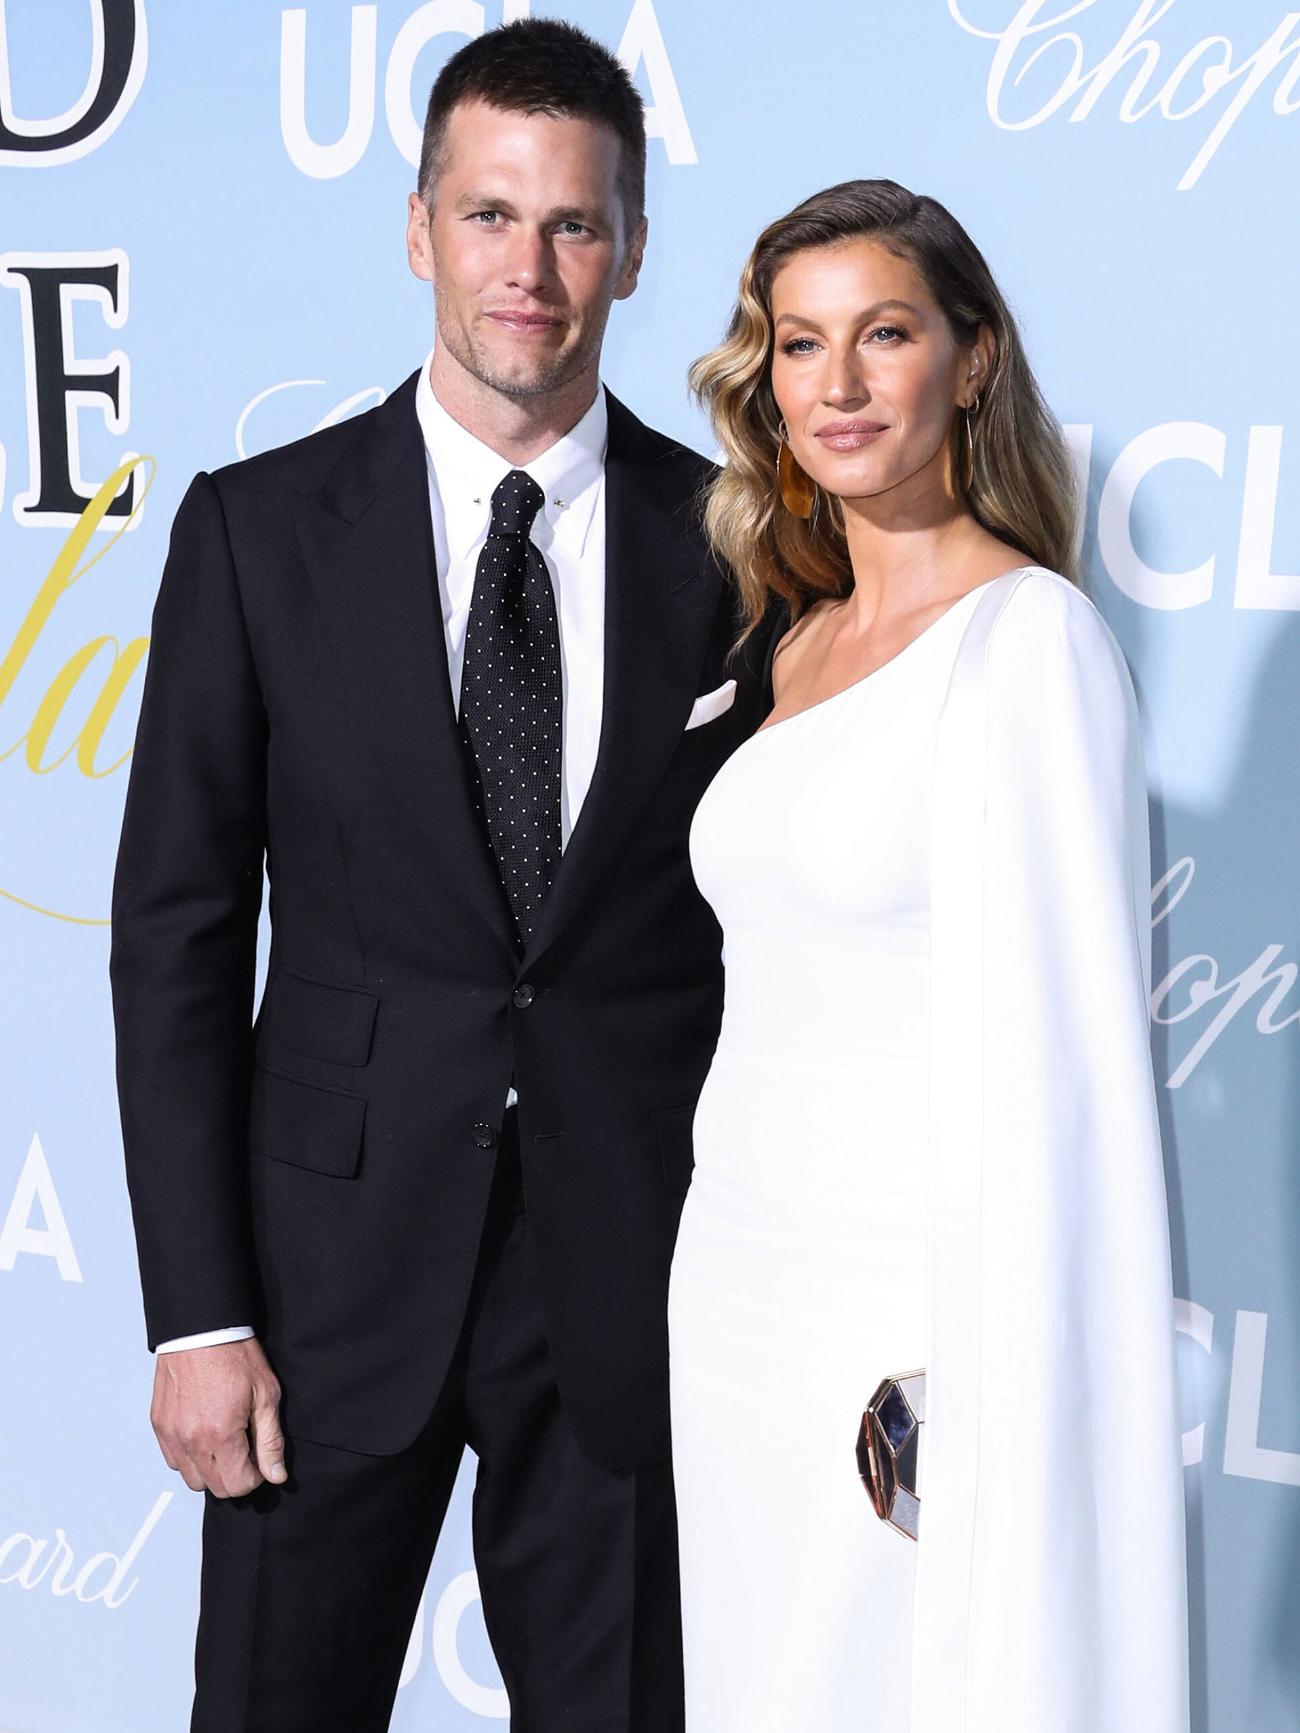 Gisele Bündchen & Tom Brady at the 2019 Hollywood For Science Gala